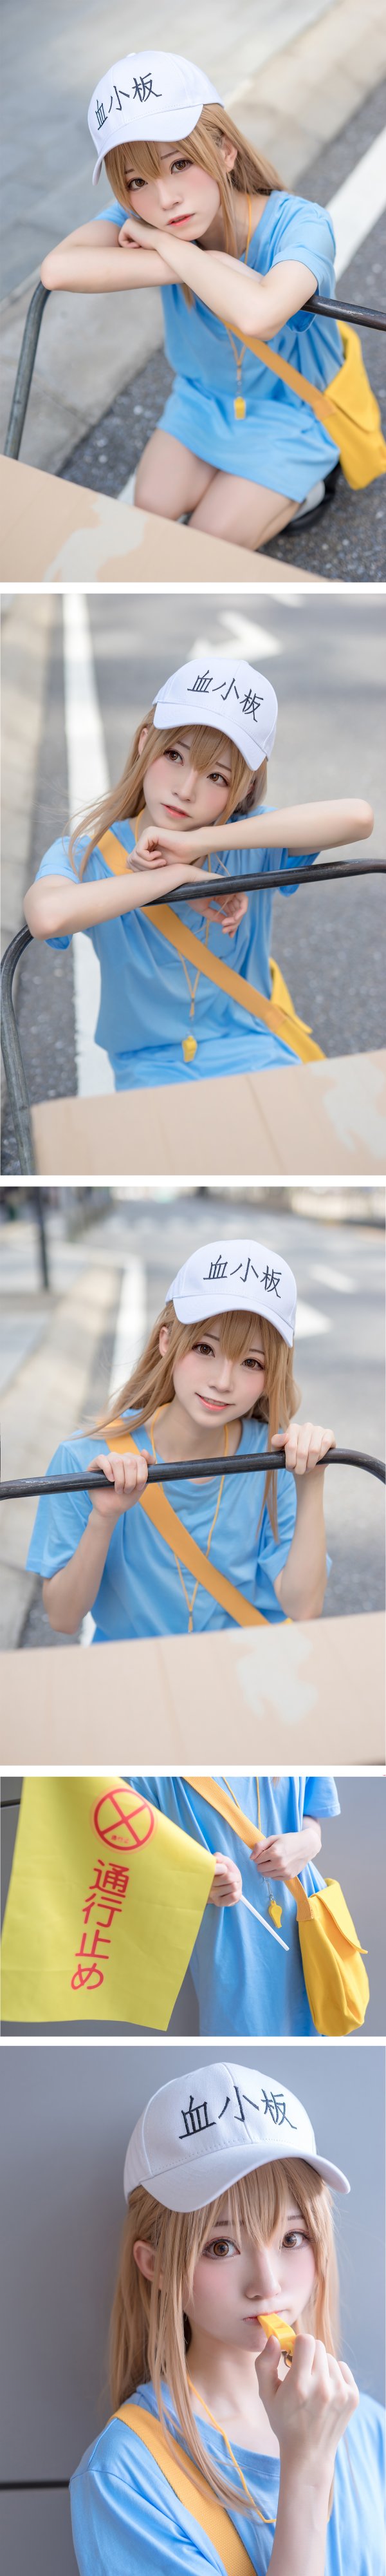 Platelet Cosplay by Kitaro